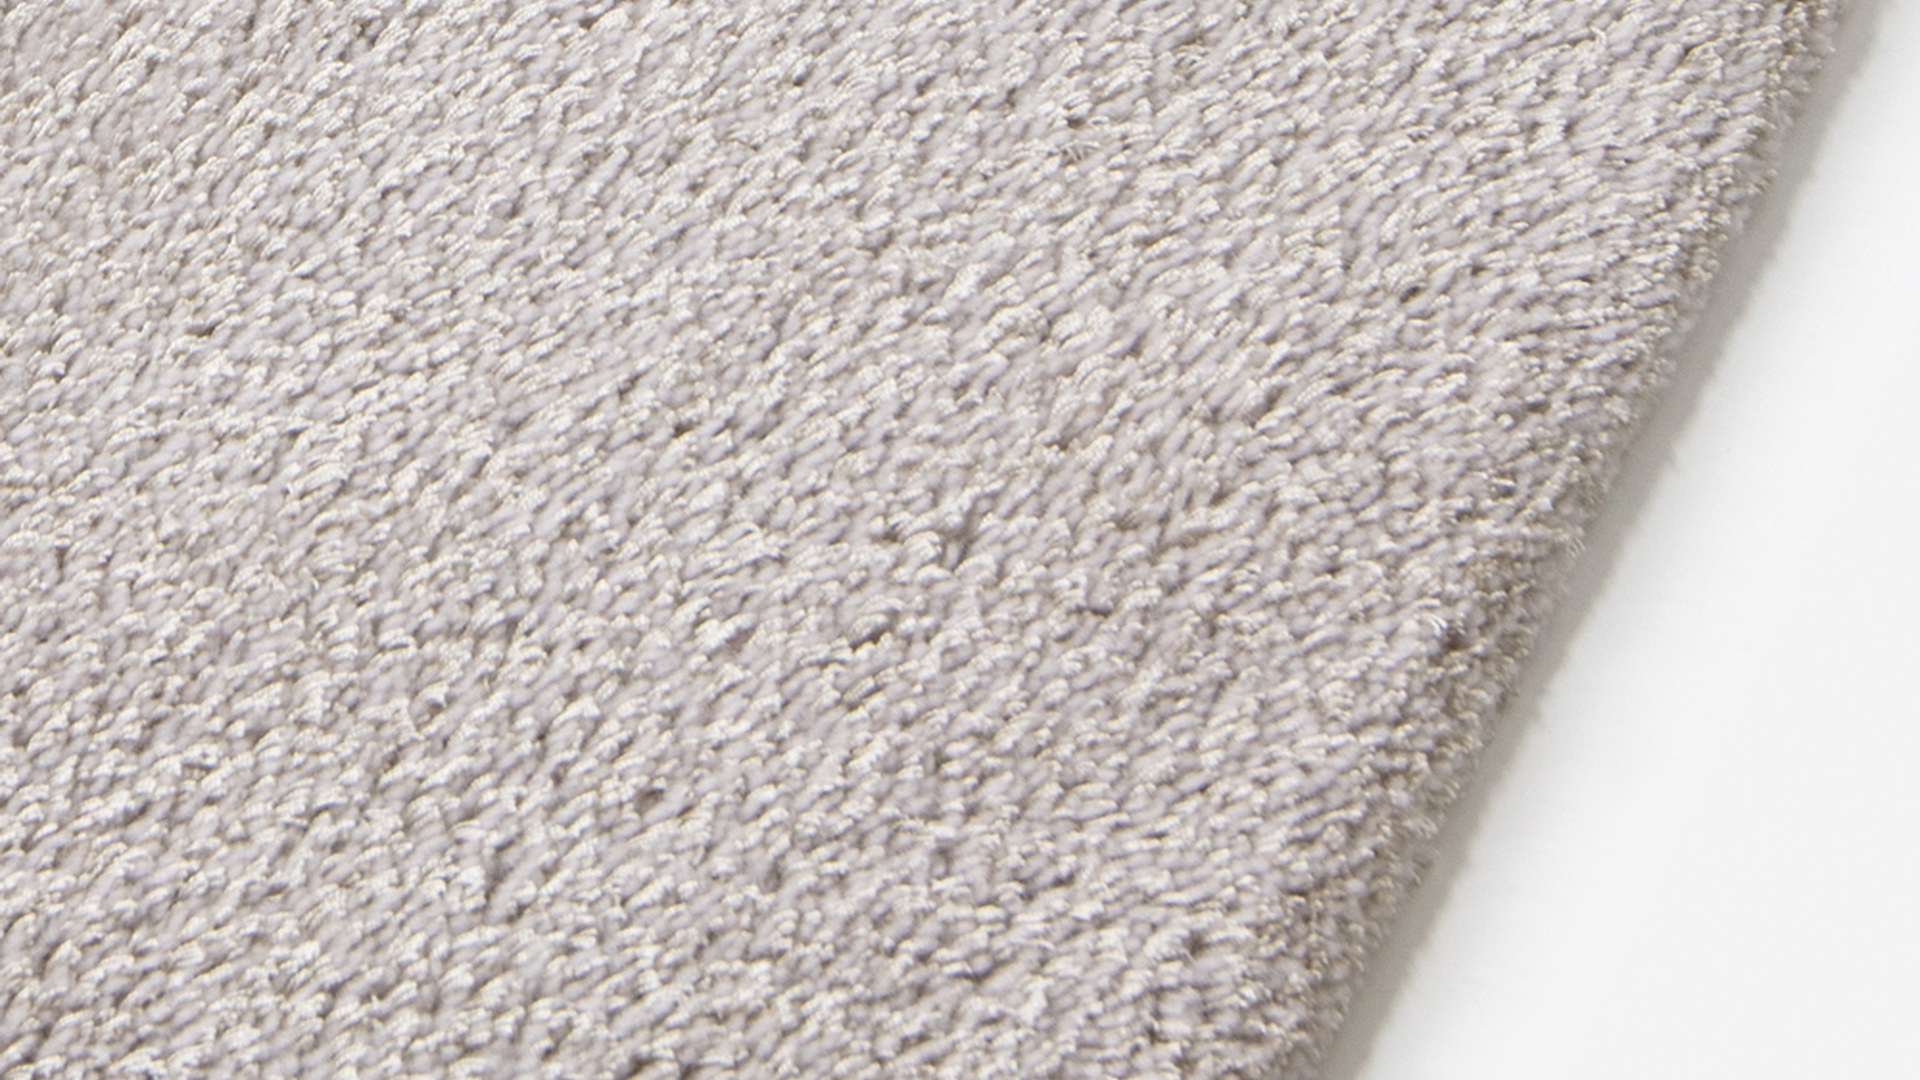 cc-tapis_LayersCollection_StudioPietBoon_layers-core-plain-dust-cover.jpg